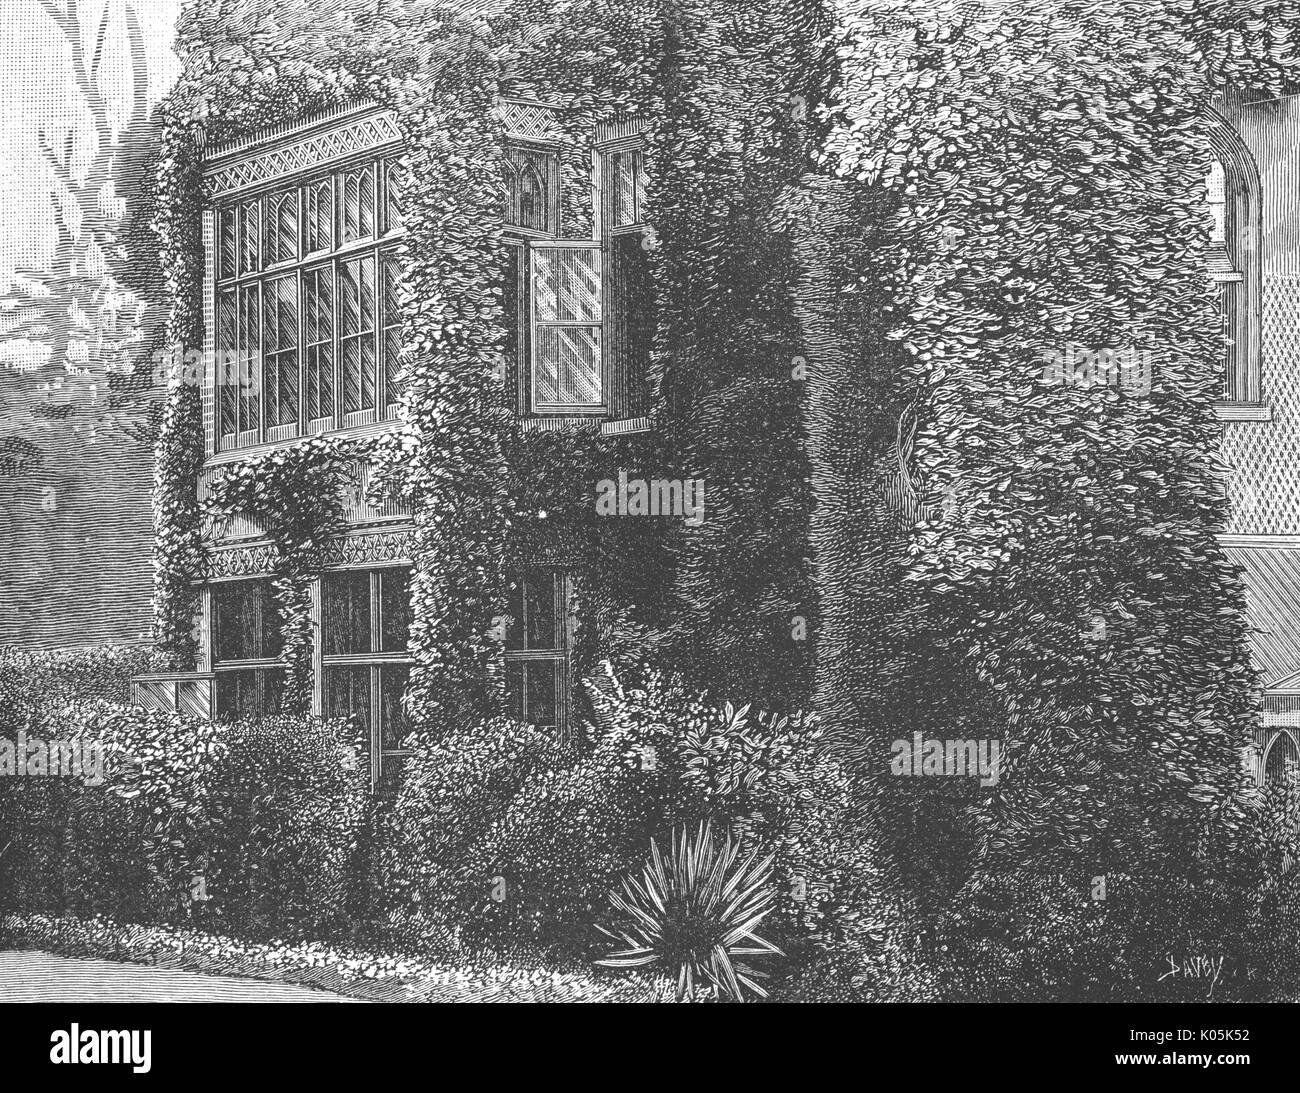 Alfred lord Tennyson (1809 - 1892) English poet's study in Farringford, Isle of Wight, seen from the garden      Date: Stock Photo